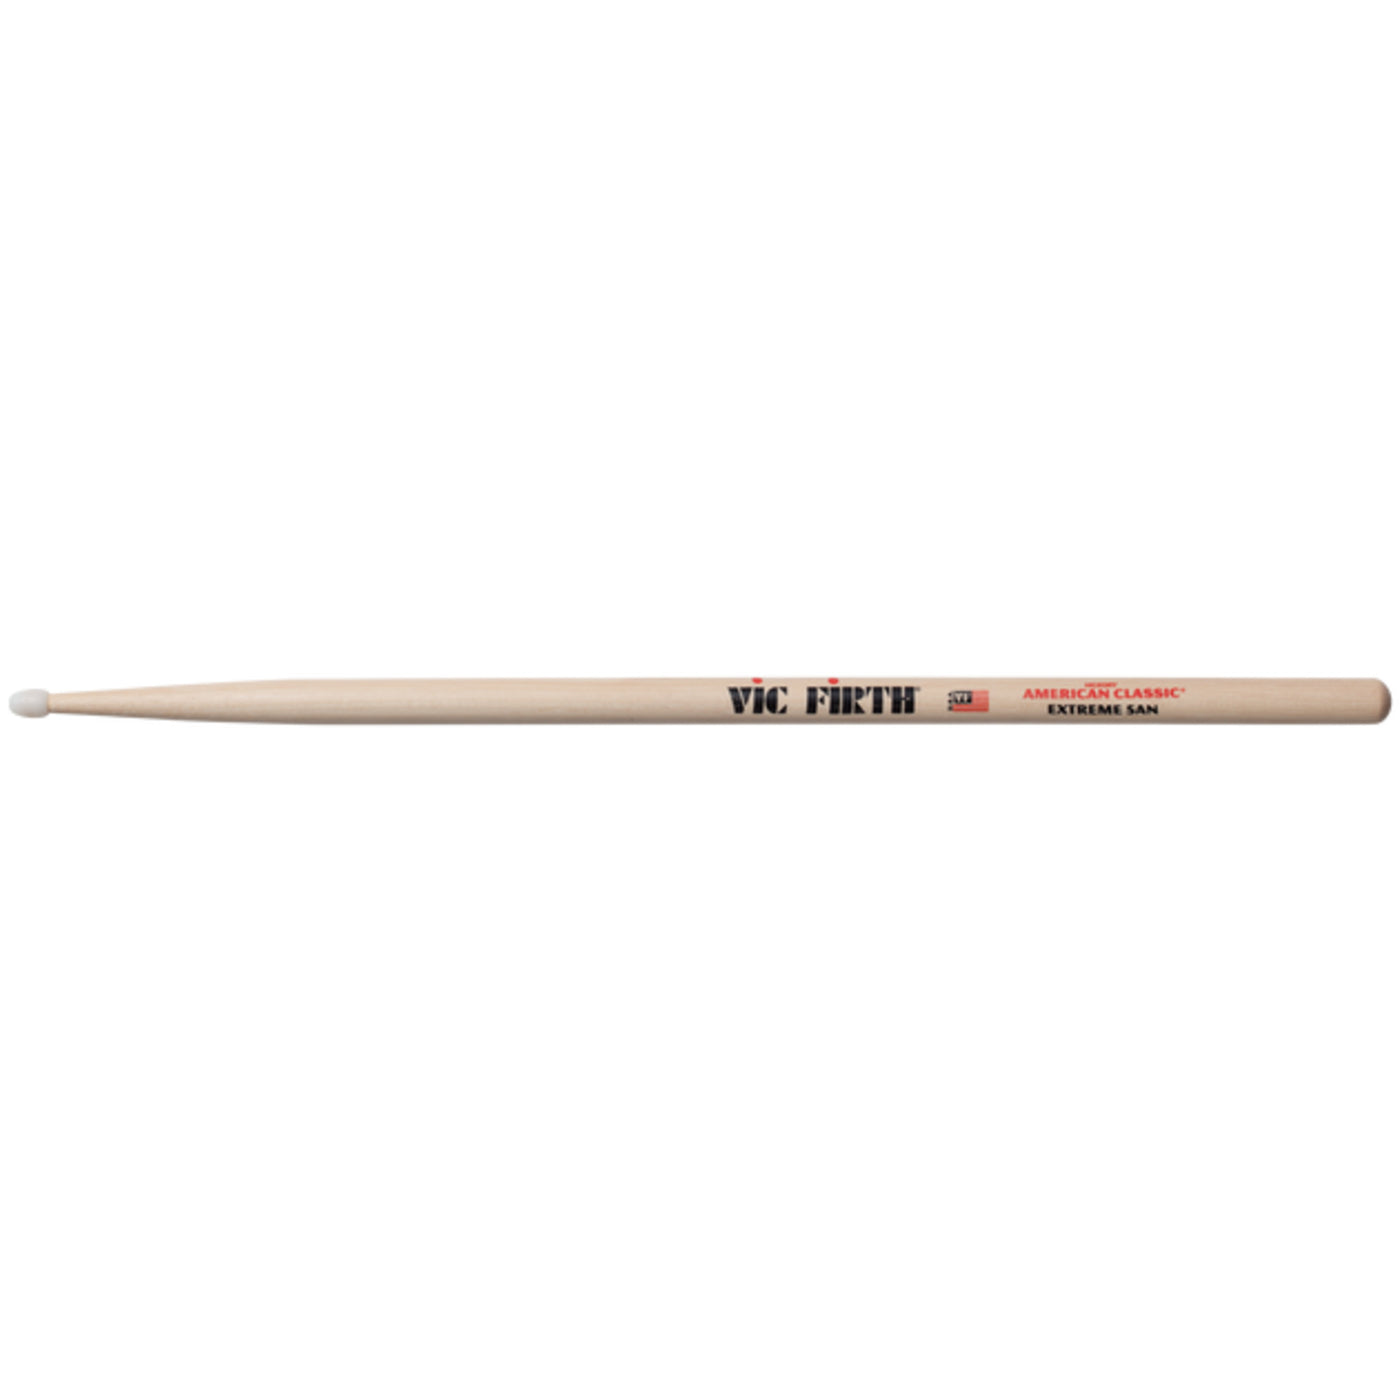 Vic Firth American Classic Extreme 5AN - Nylon Tip Drumstick (X5AN)